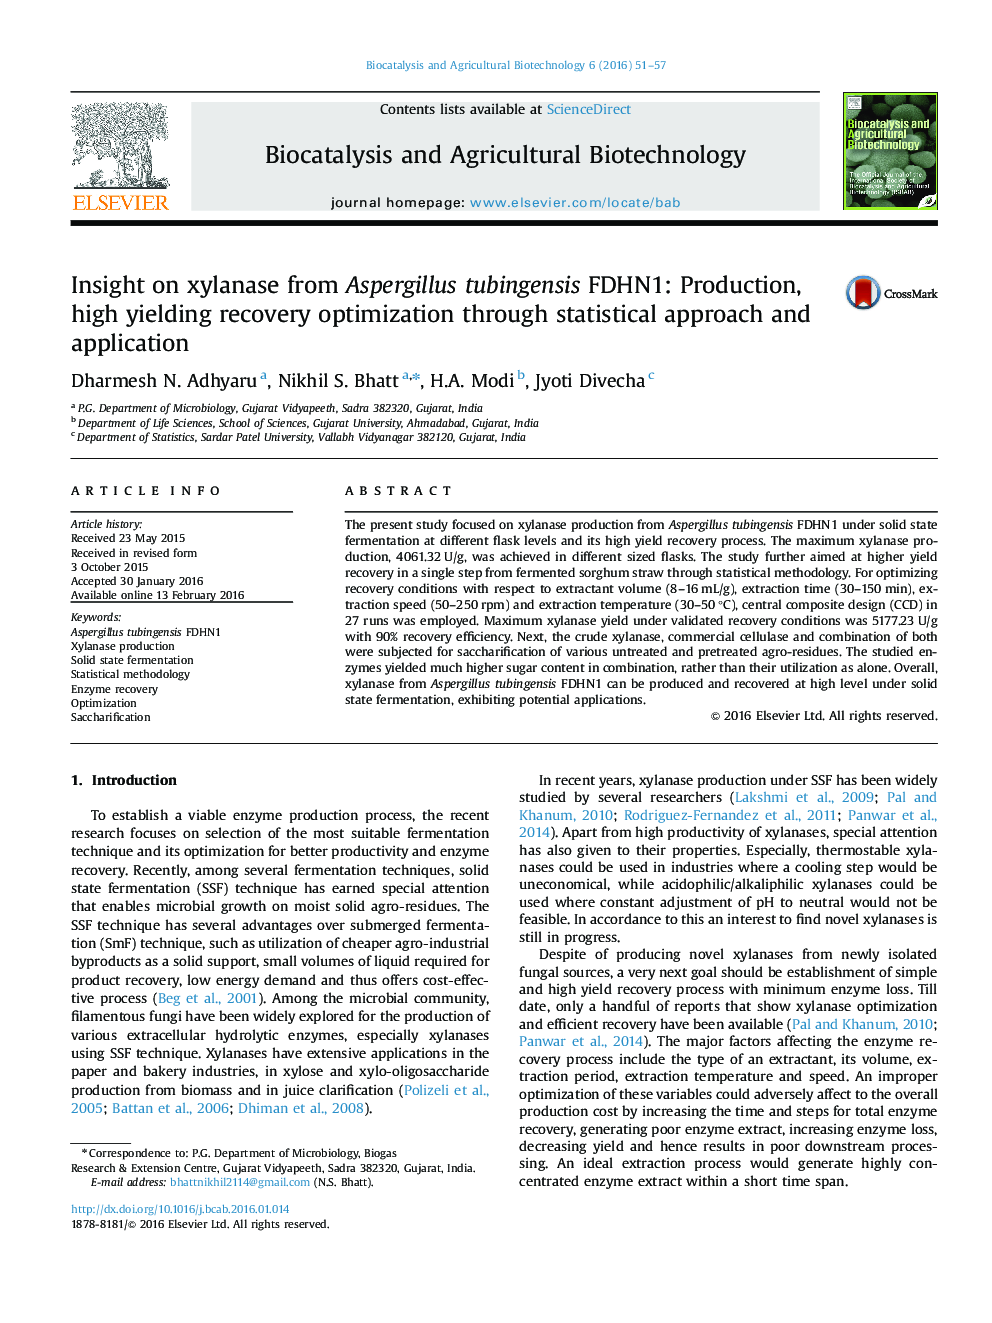 Insight on xylanase from Aspergillus tubingensis FDHN1: Production, high yielding recovery optimization through statistical approach and application